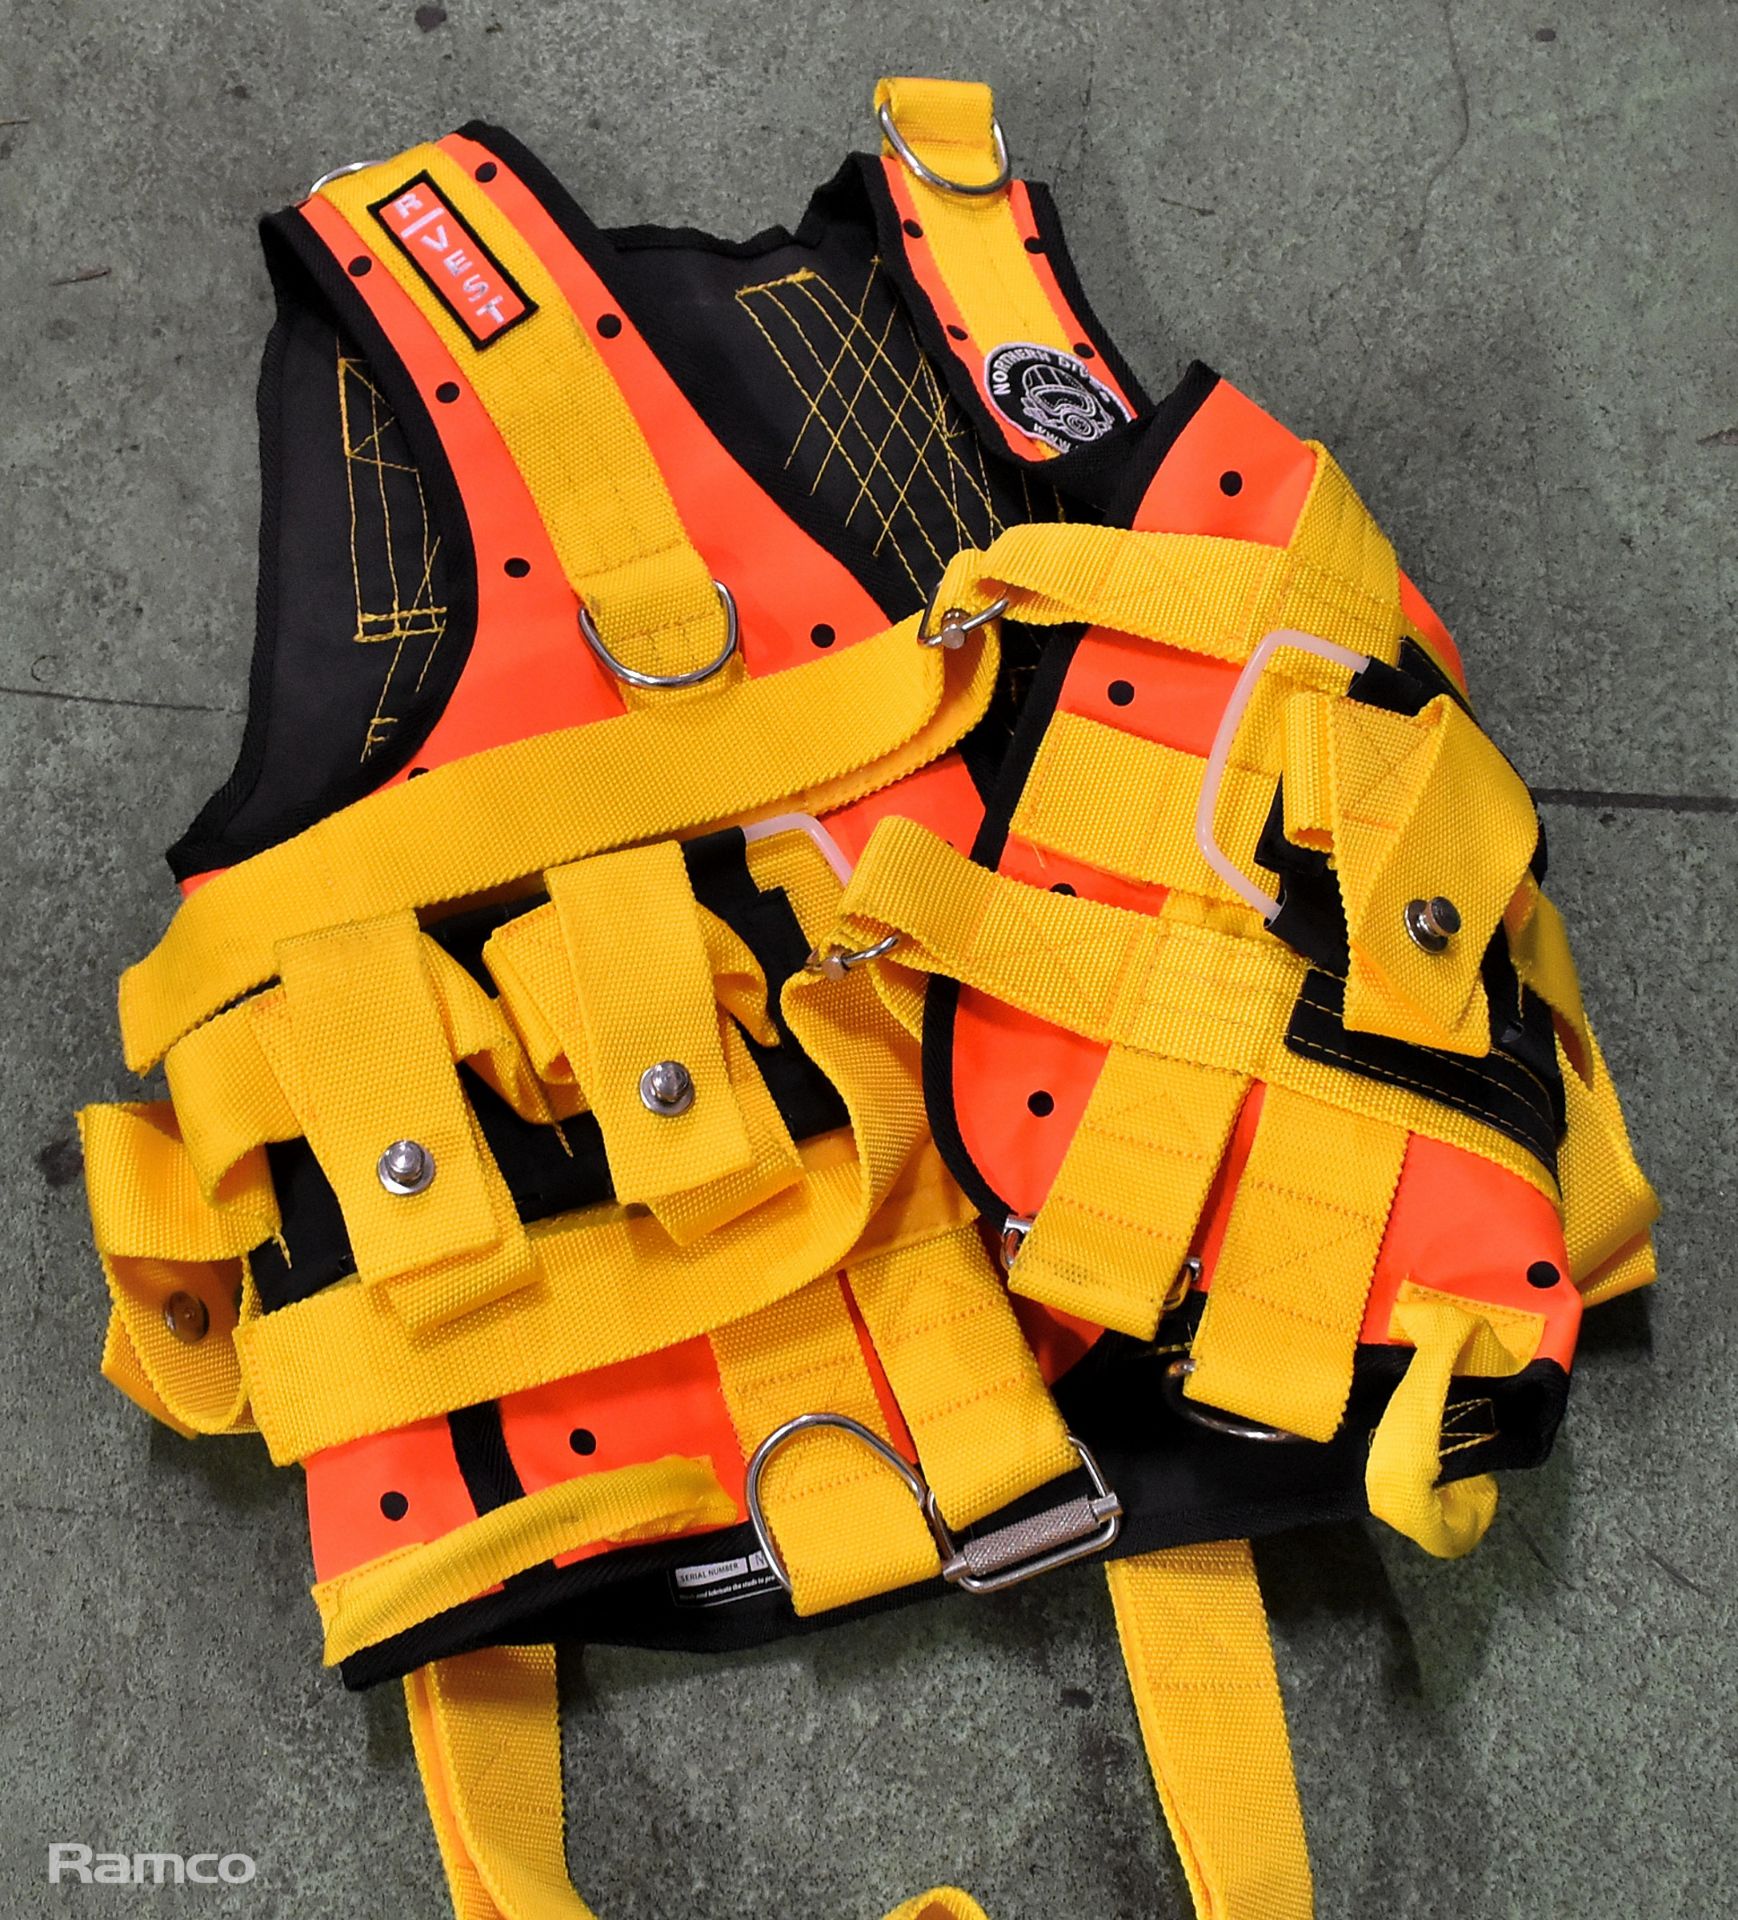 2x Northern Diver R-Vest harnesses - Manufacture Date: August 2017 - MAY REQUIRE CALIBRATION - Image 10 of 10